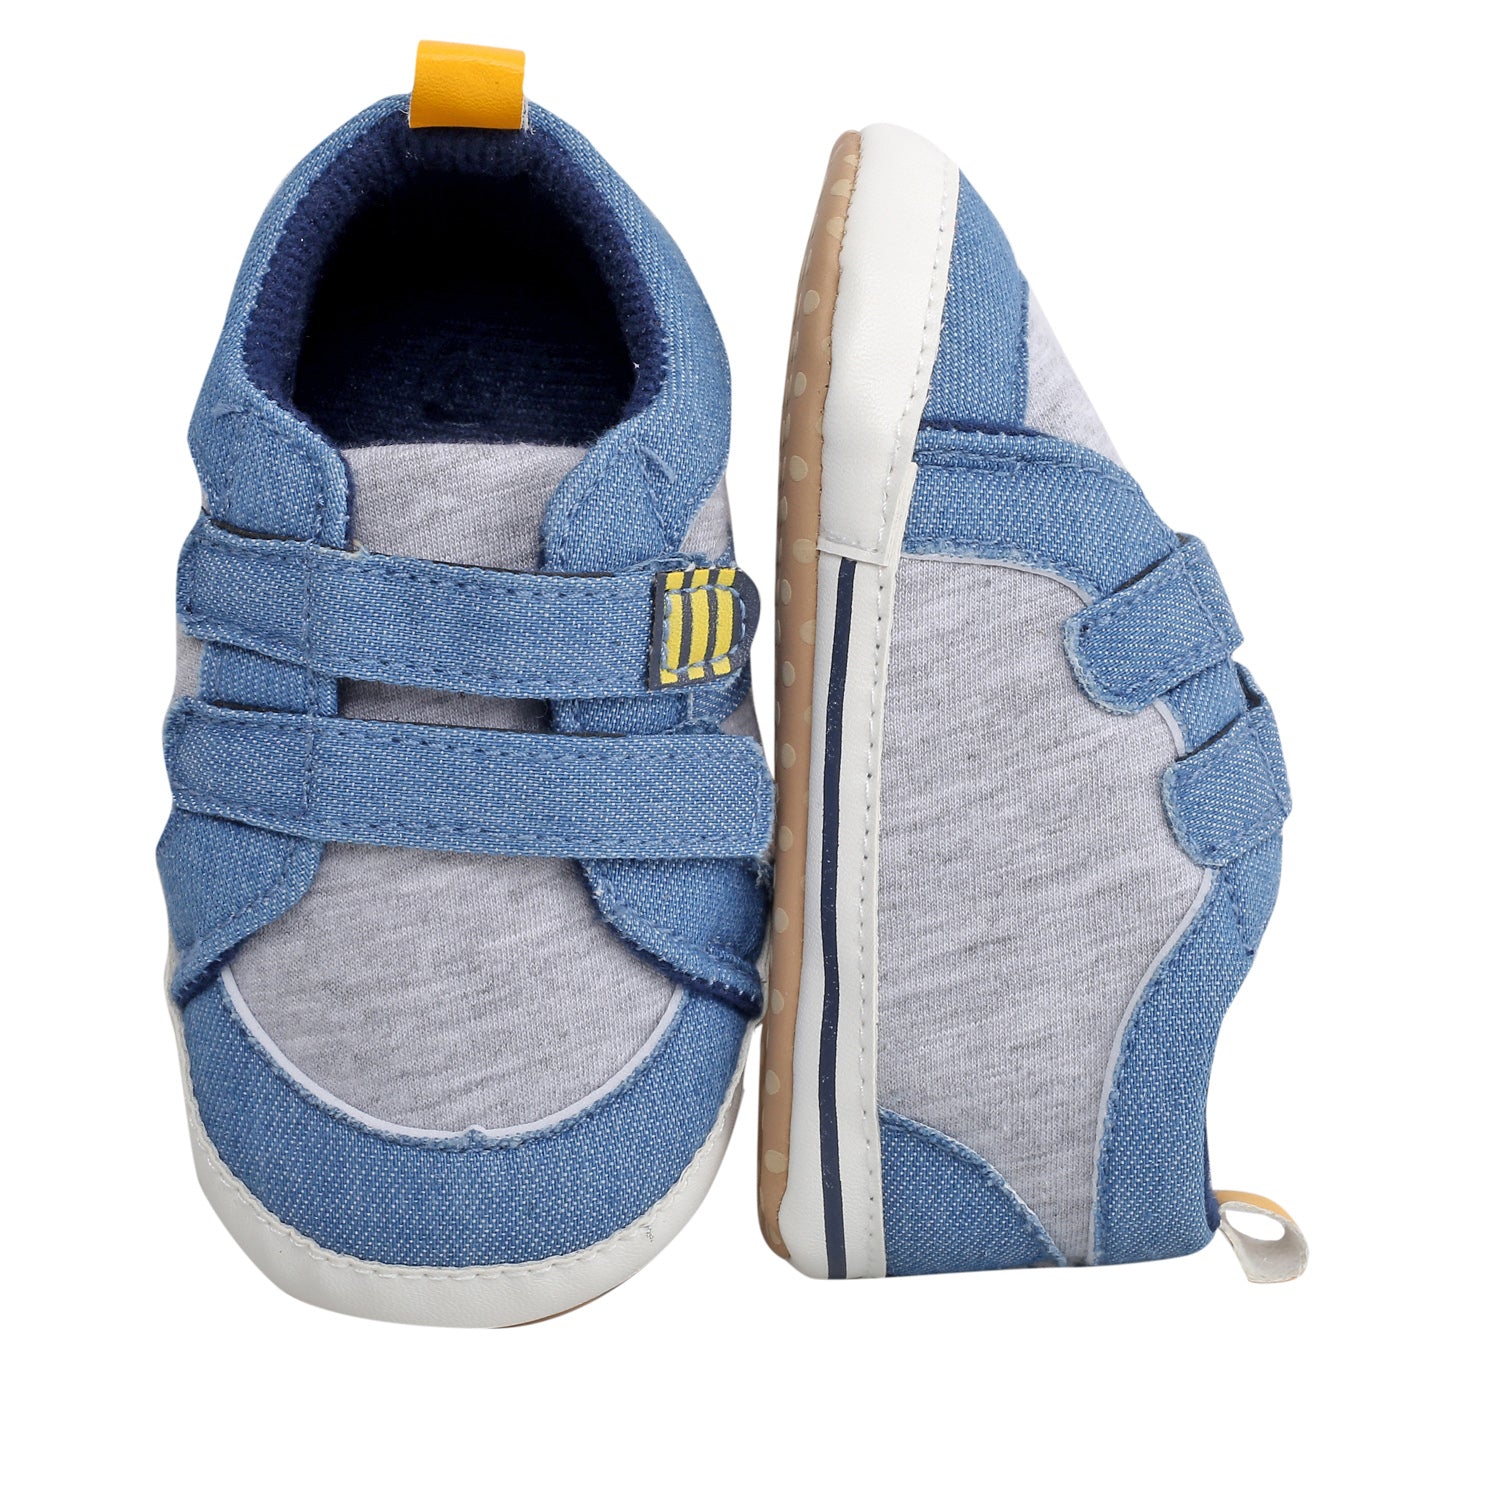 Casual Blue And Grey Velcro Booties - Baby Moo